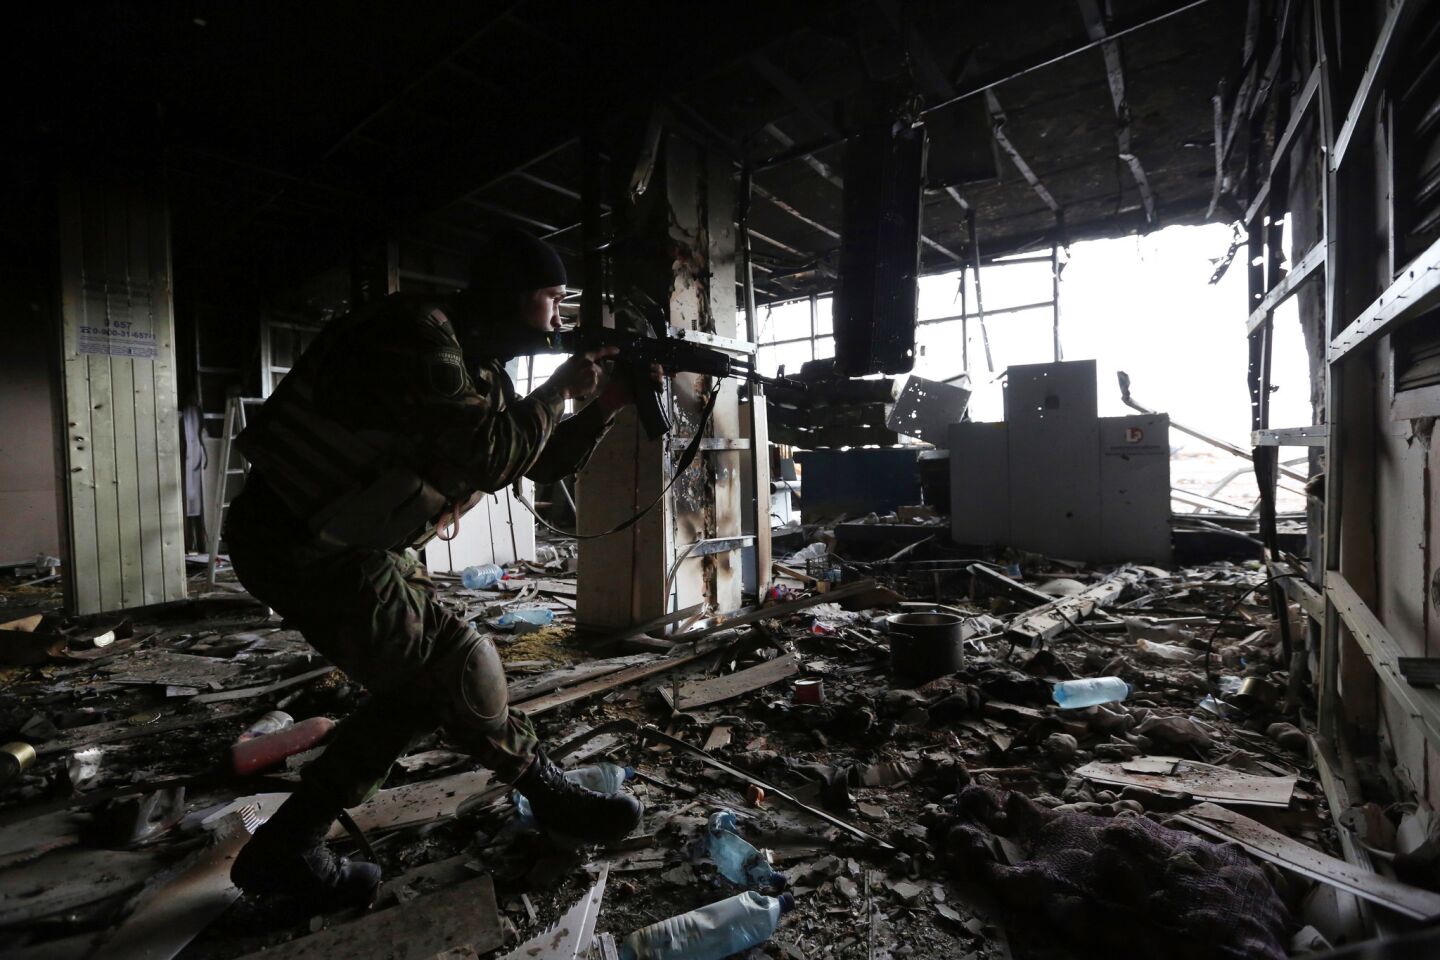 A Ukrainian soldier patrols inside the Donetsk airport. It has been the scene of fierce fighting between government troops and pro-Russia separatists since May.